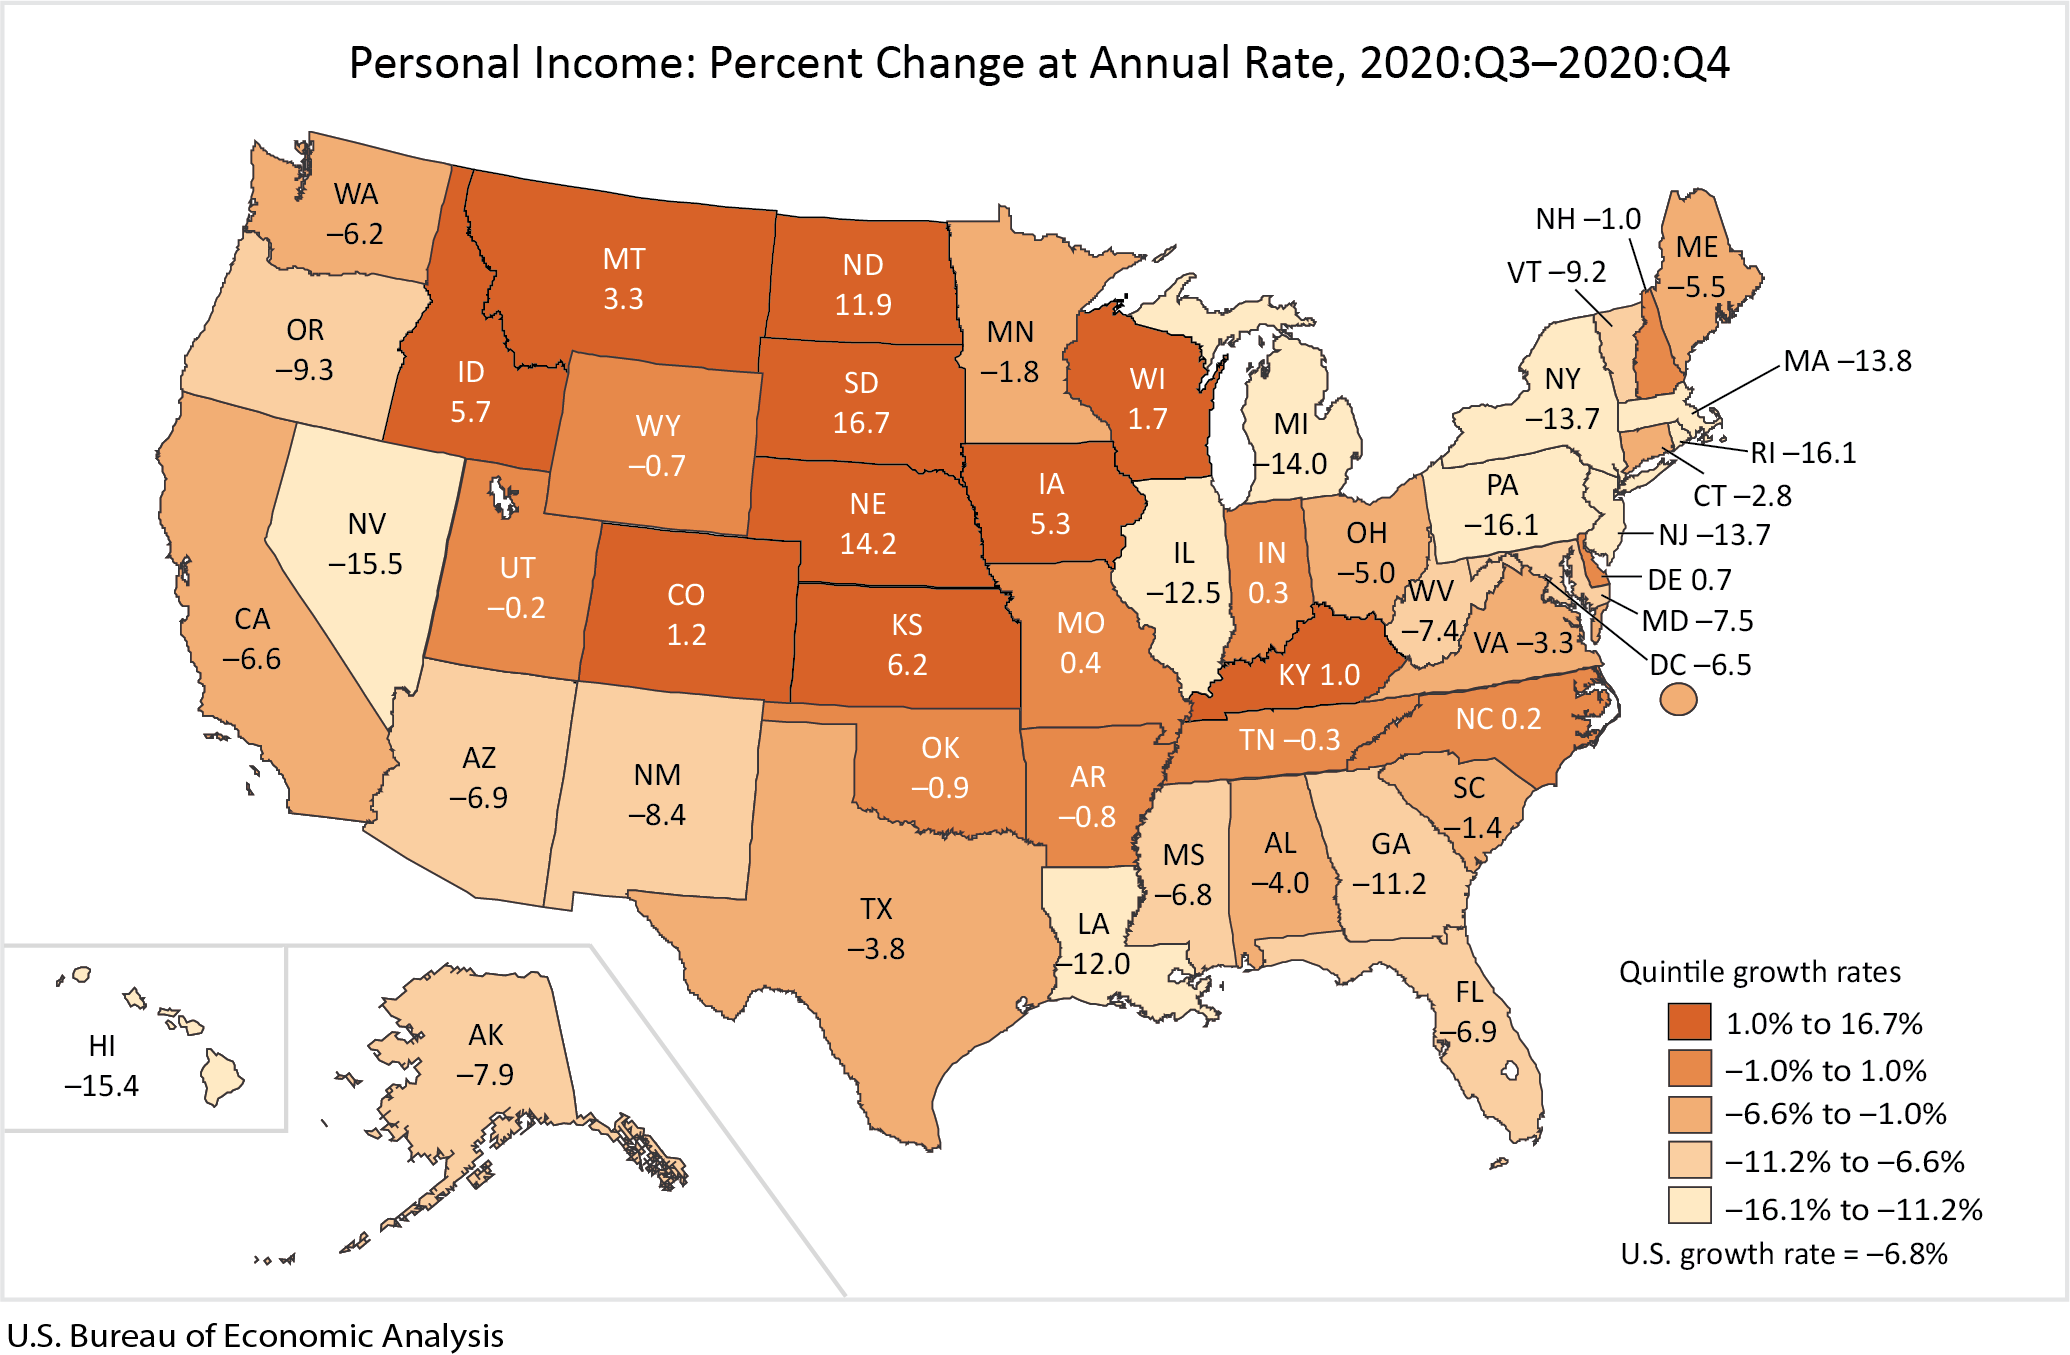 map: Personal Income: Percent Change at Annual Rate, 2020:Q3-2020:Q4